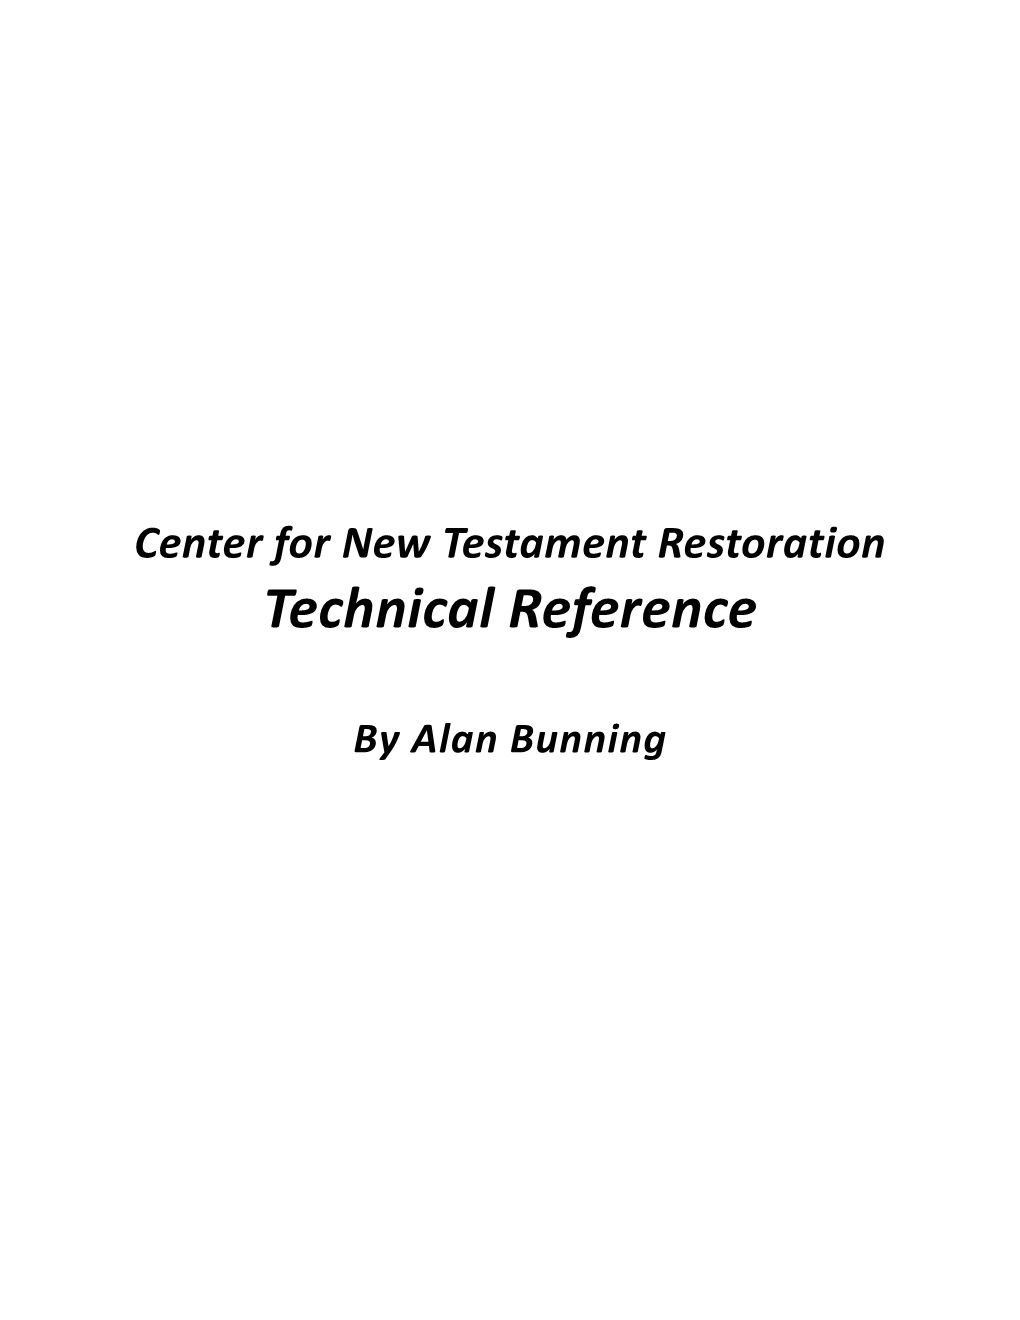 CNTR Technical Reference